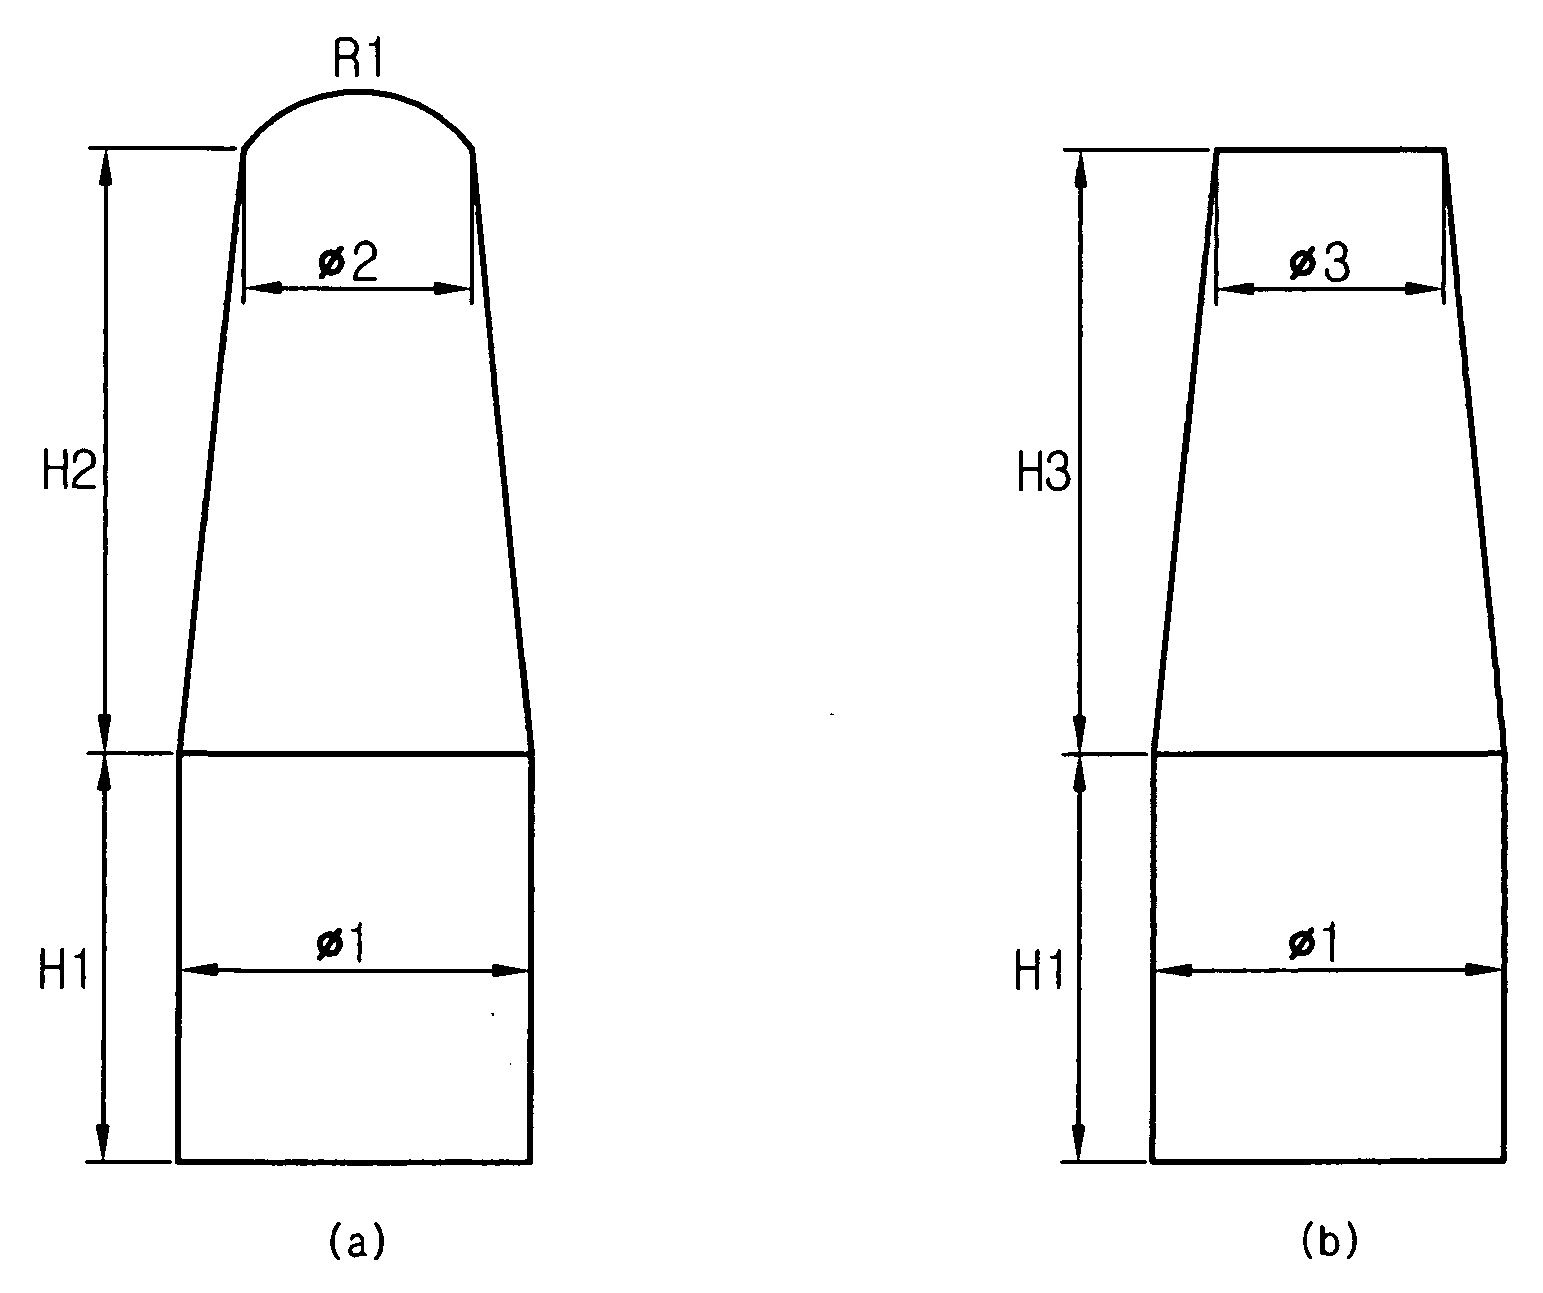 Wafer support pin for preventing slip dislocation during annealing of water and wafer annealing method using the same